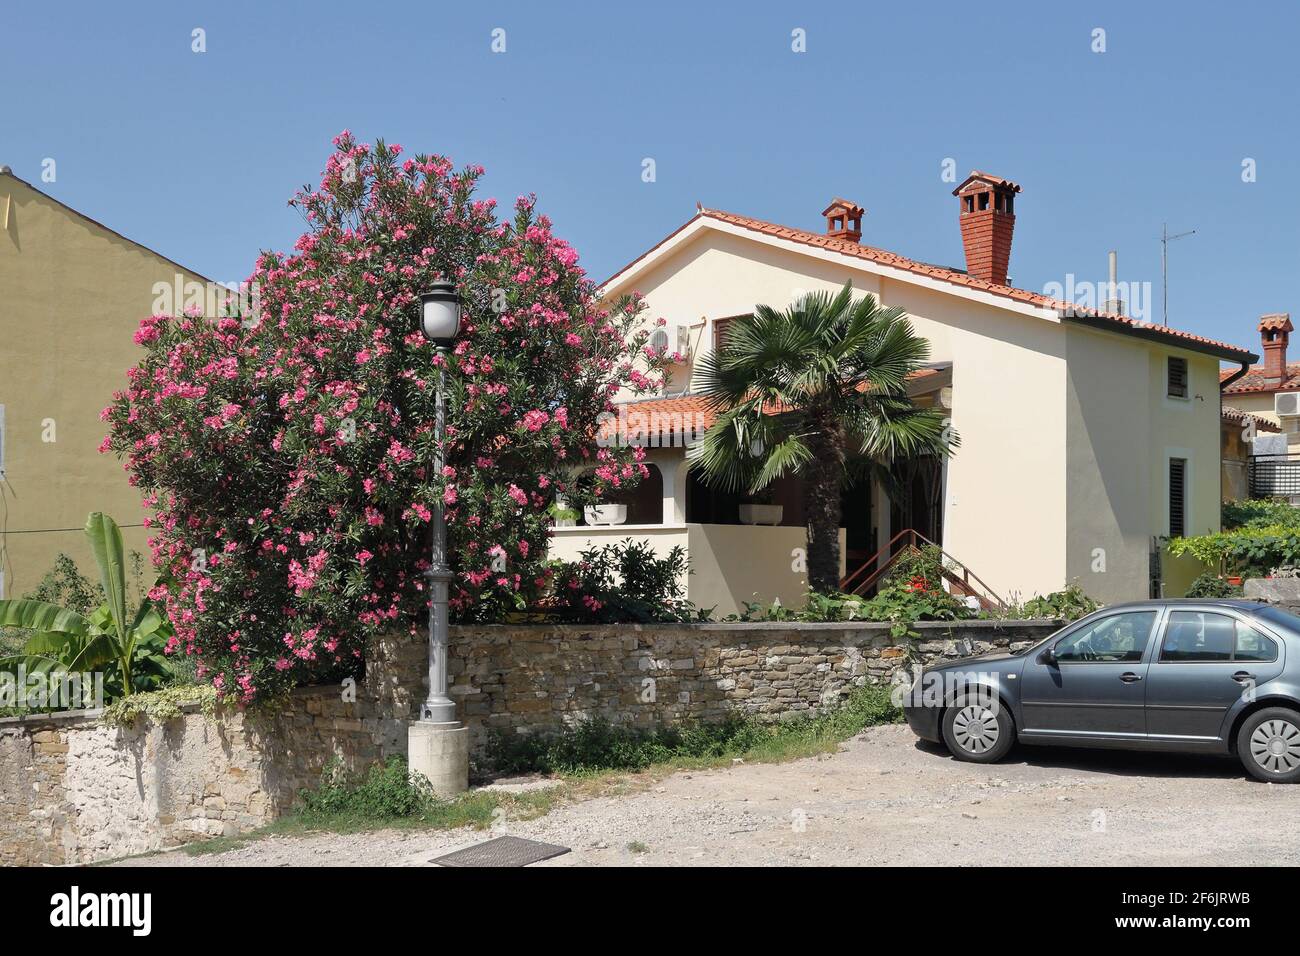 Apartment building and car at entrance. Isola, Slovenia Stock Photo